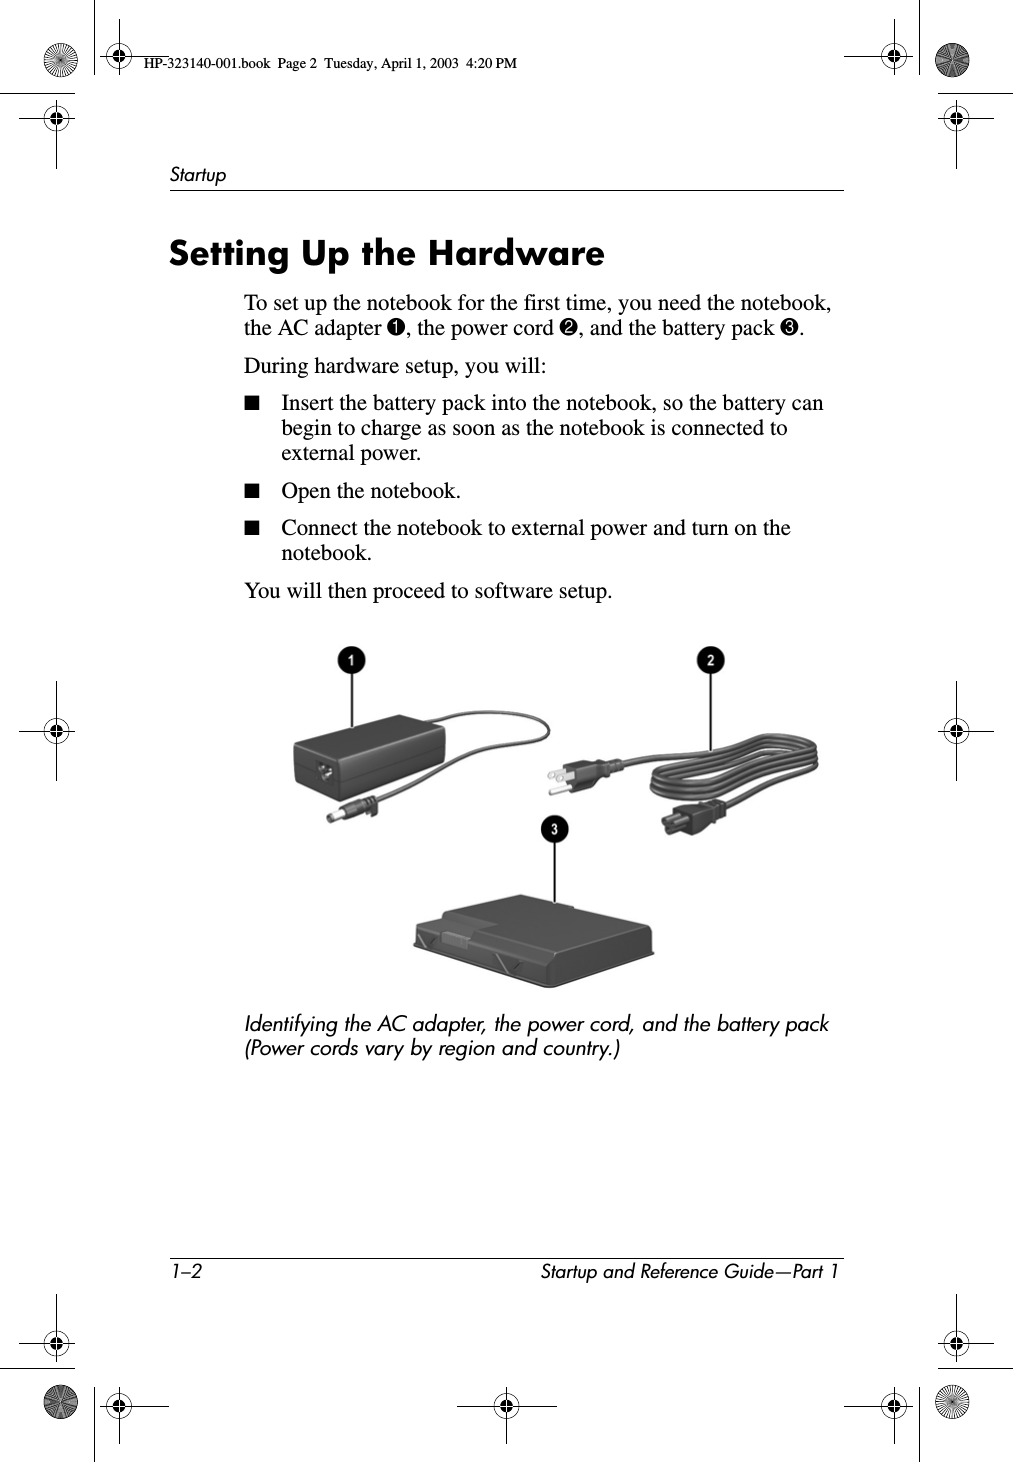 1–2 Startup and Reference Guide—Part 1StartupSetting Up the HardwareTo set up the notebook for the first time, you need the notebook, the AC adapter 1, the power cord 2, and the battery pack 3.During hardware setup, you will:■Insert the battery pack into the notebook, so the battery can begin to charge as soon as the notebook is connected to external power.■Open the notebook.■Connect the notebook to external power and turn on the notebook.You will then proceed to software setup.Identifying the AC adapter, the power cord, and the battery pack (Power cords vary by region and country.)HP-323140-001.book  Page 2  Tuesday, April 1, 2003  4:20 PM